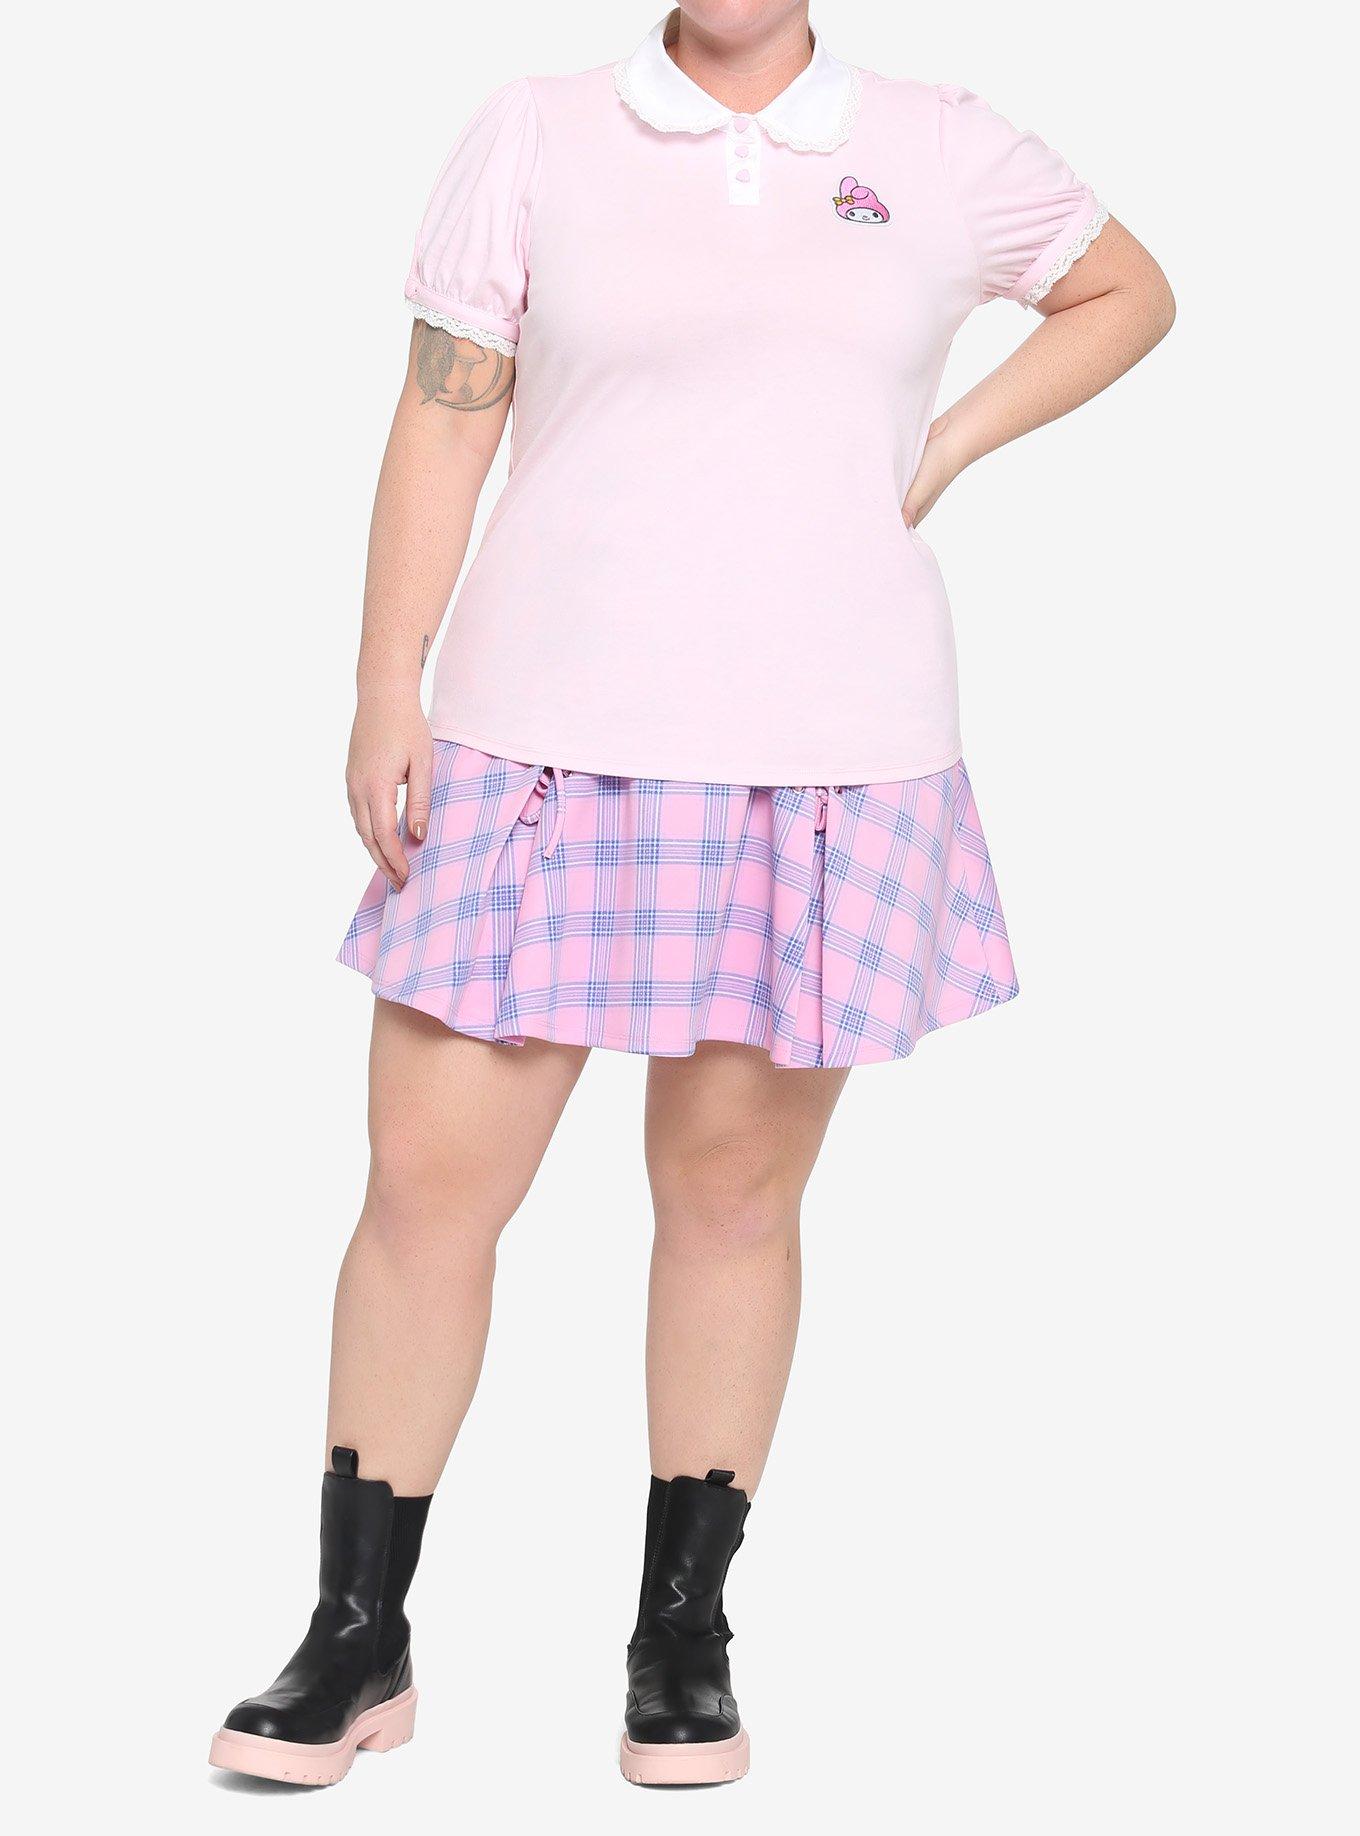 My Melody Pink Collared Girls Top Plus Size, PINK, alternate